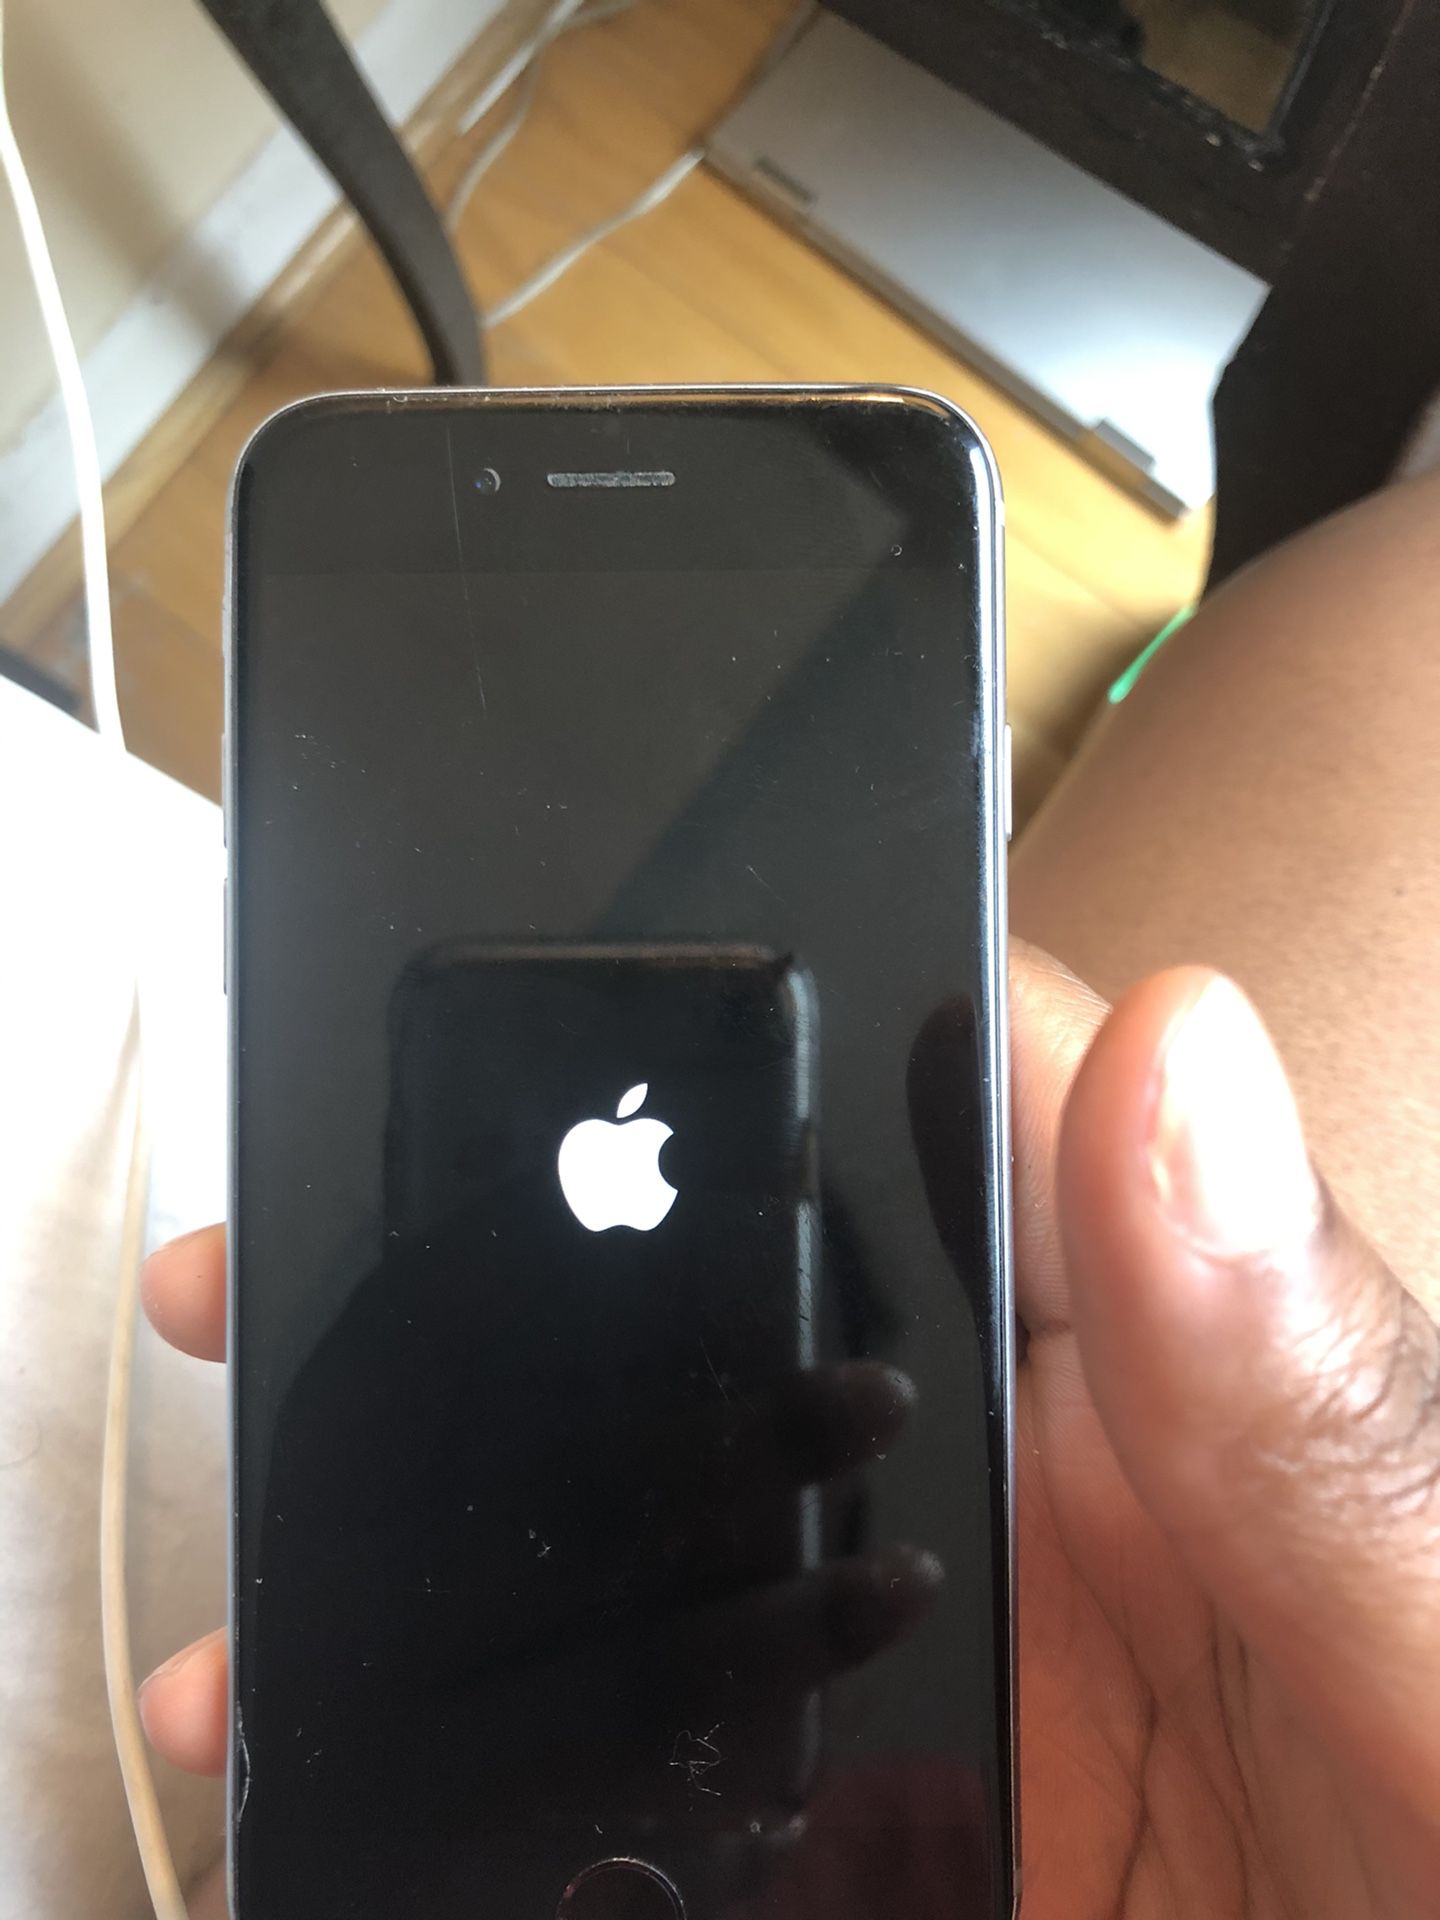 Iphone 6s space gray factory unlocked, no defects